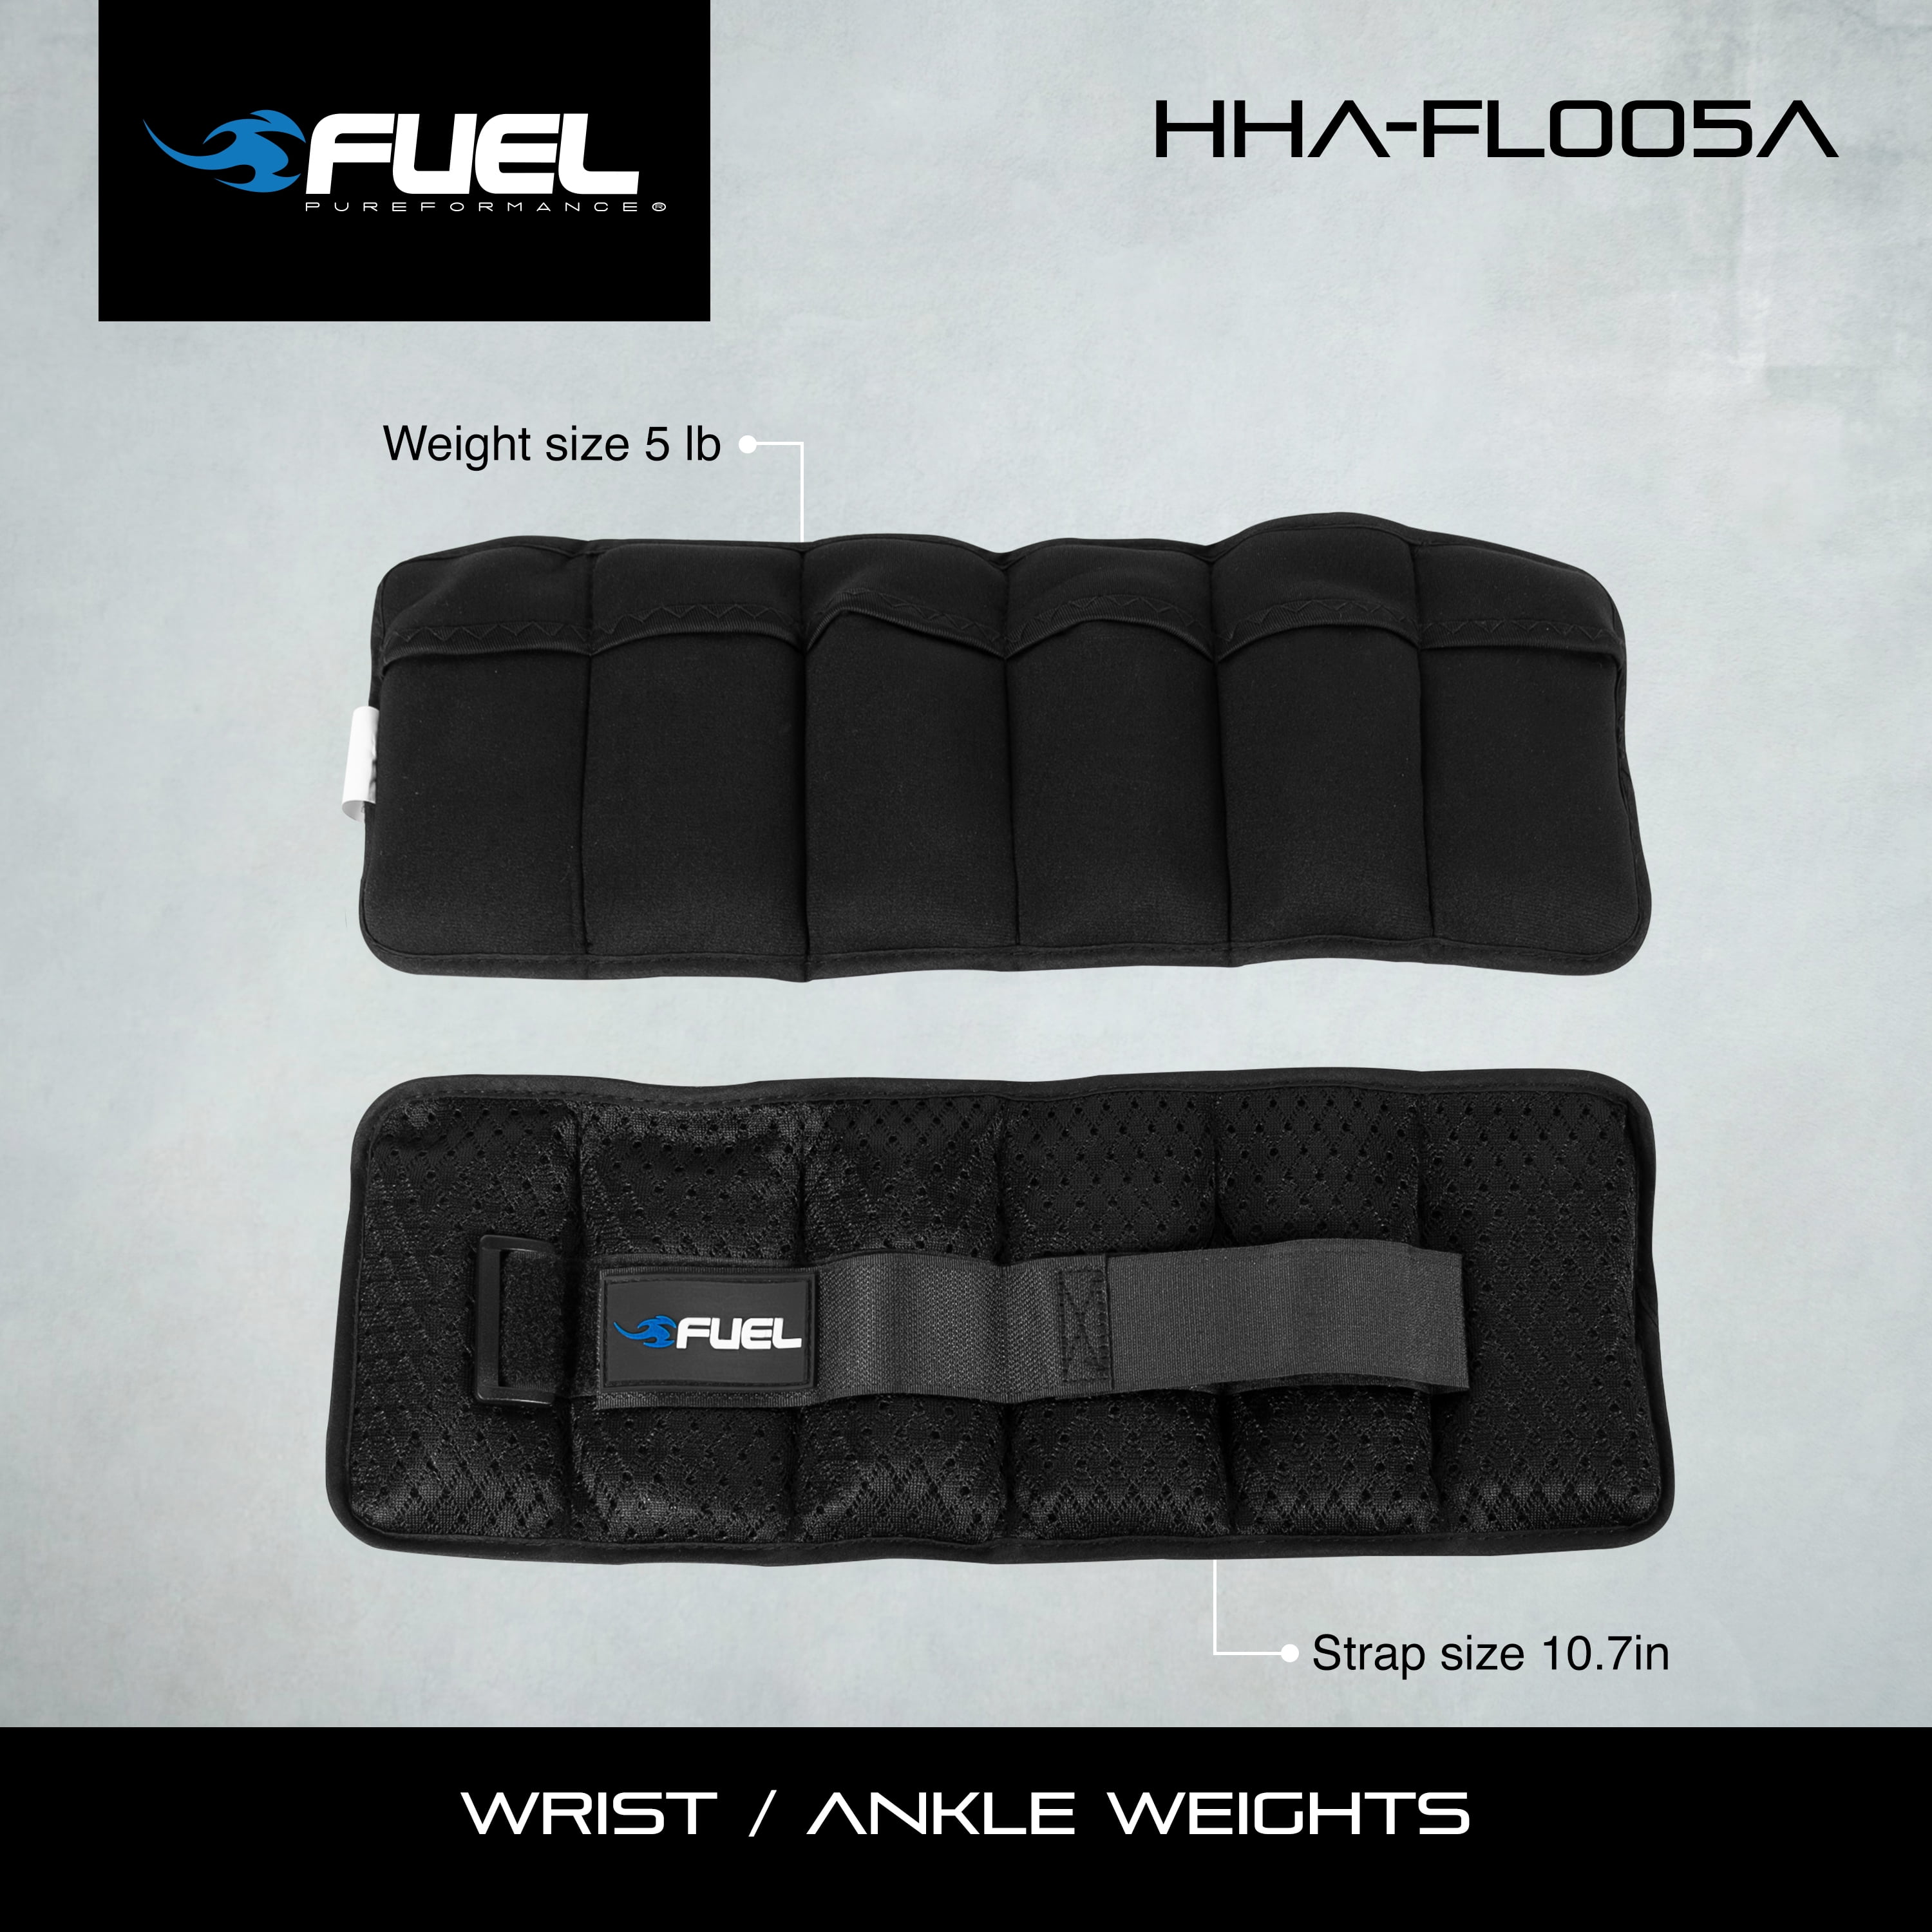 Fuel Pureformance Adjustable Wrist/Ankle Weights, 10-Pound Pair (20 lb  total) 